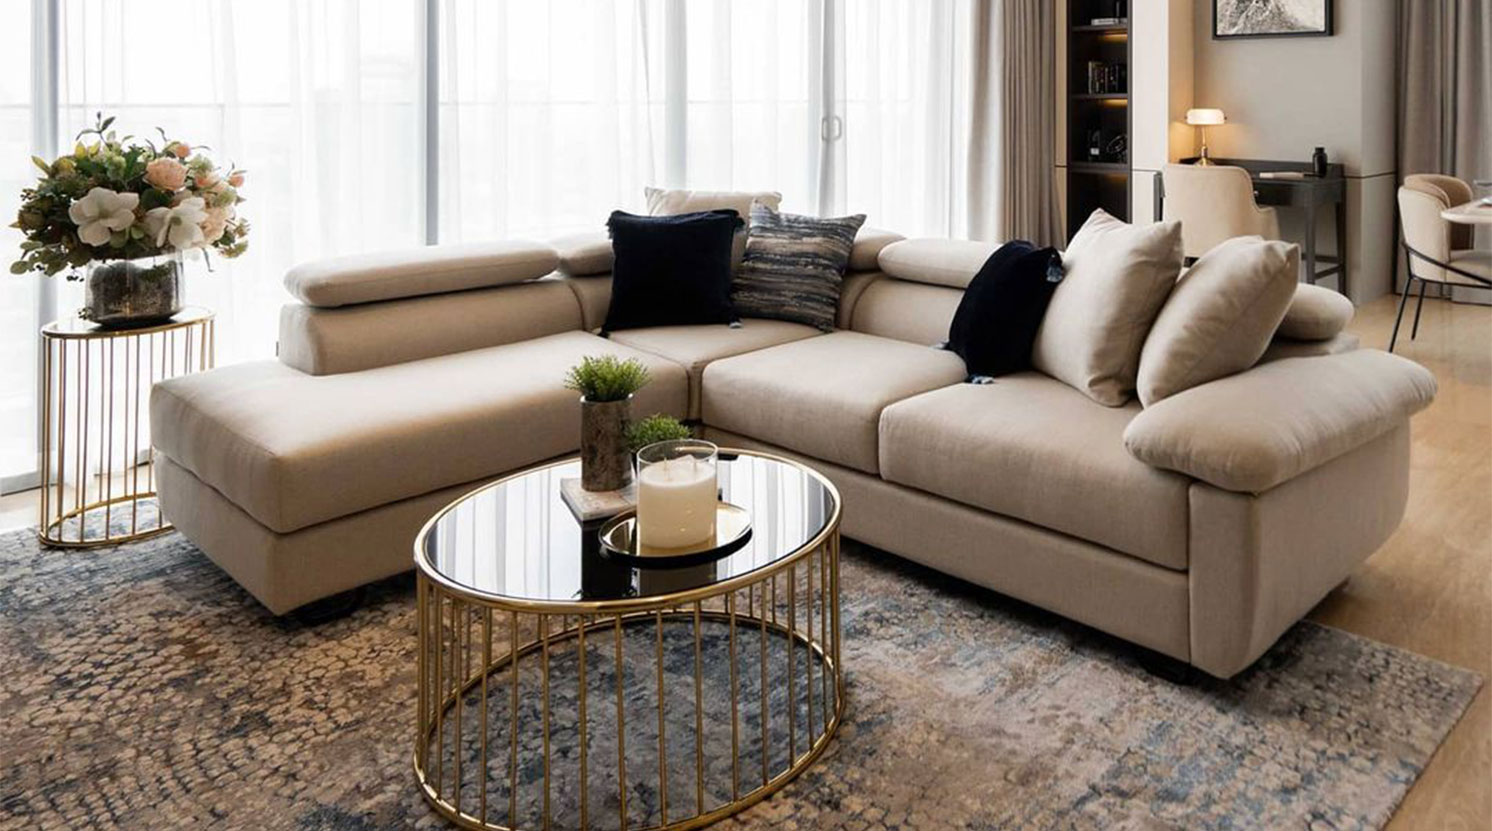 Quick And Easy Tips To Dress Your Sofa